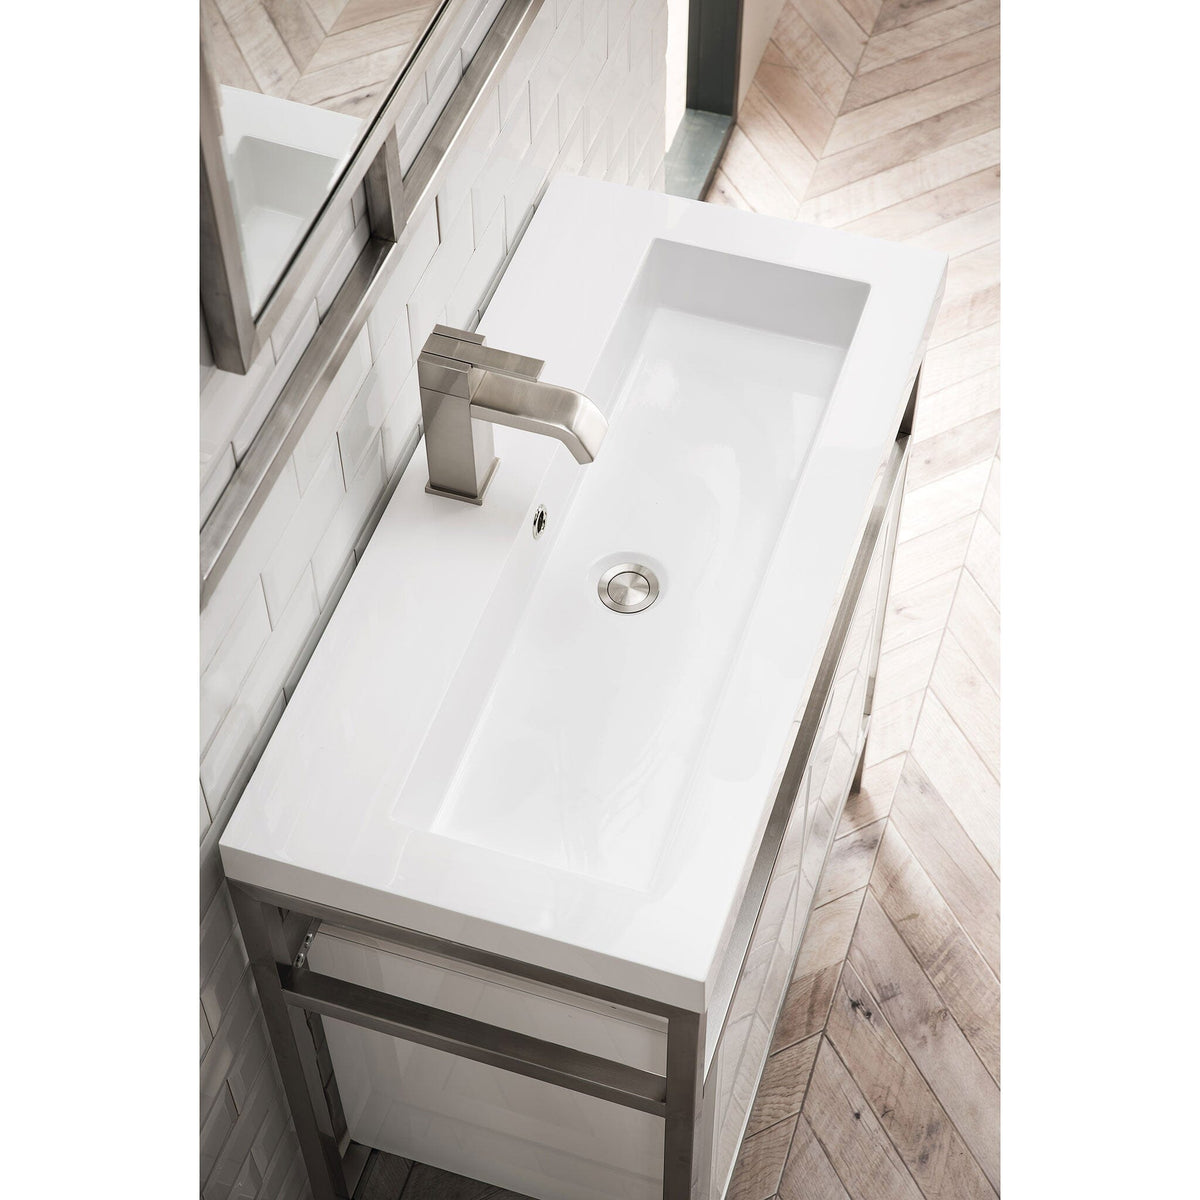 31.5" Boston Single Sink Console, Brushed Nickel w/ Storage Cabinet, White Glossy Resin Countertop